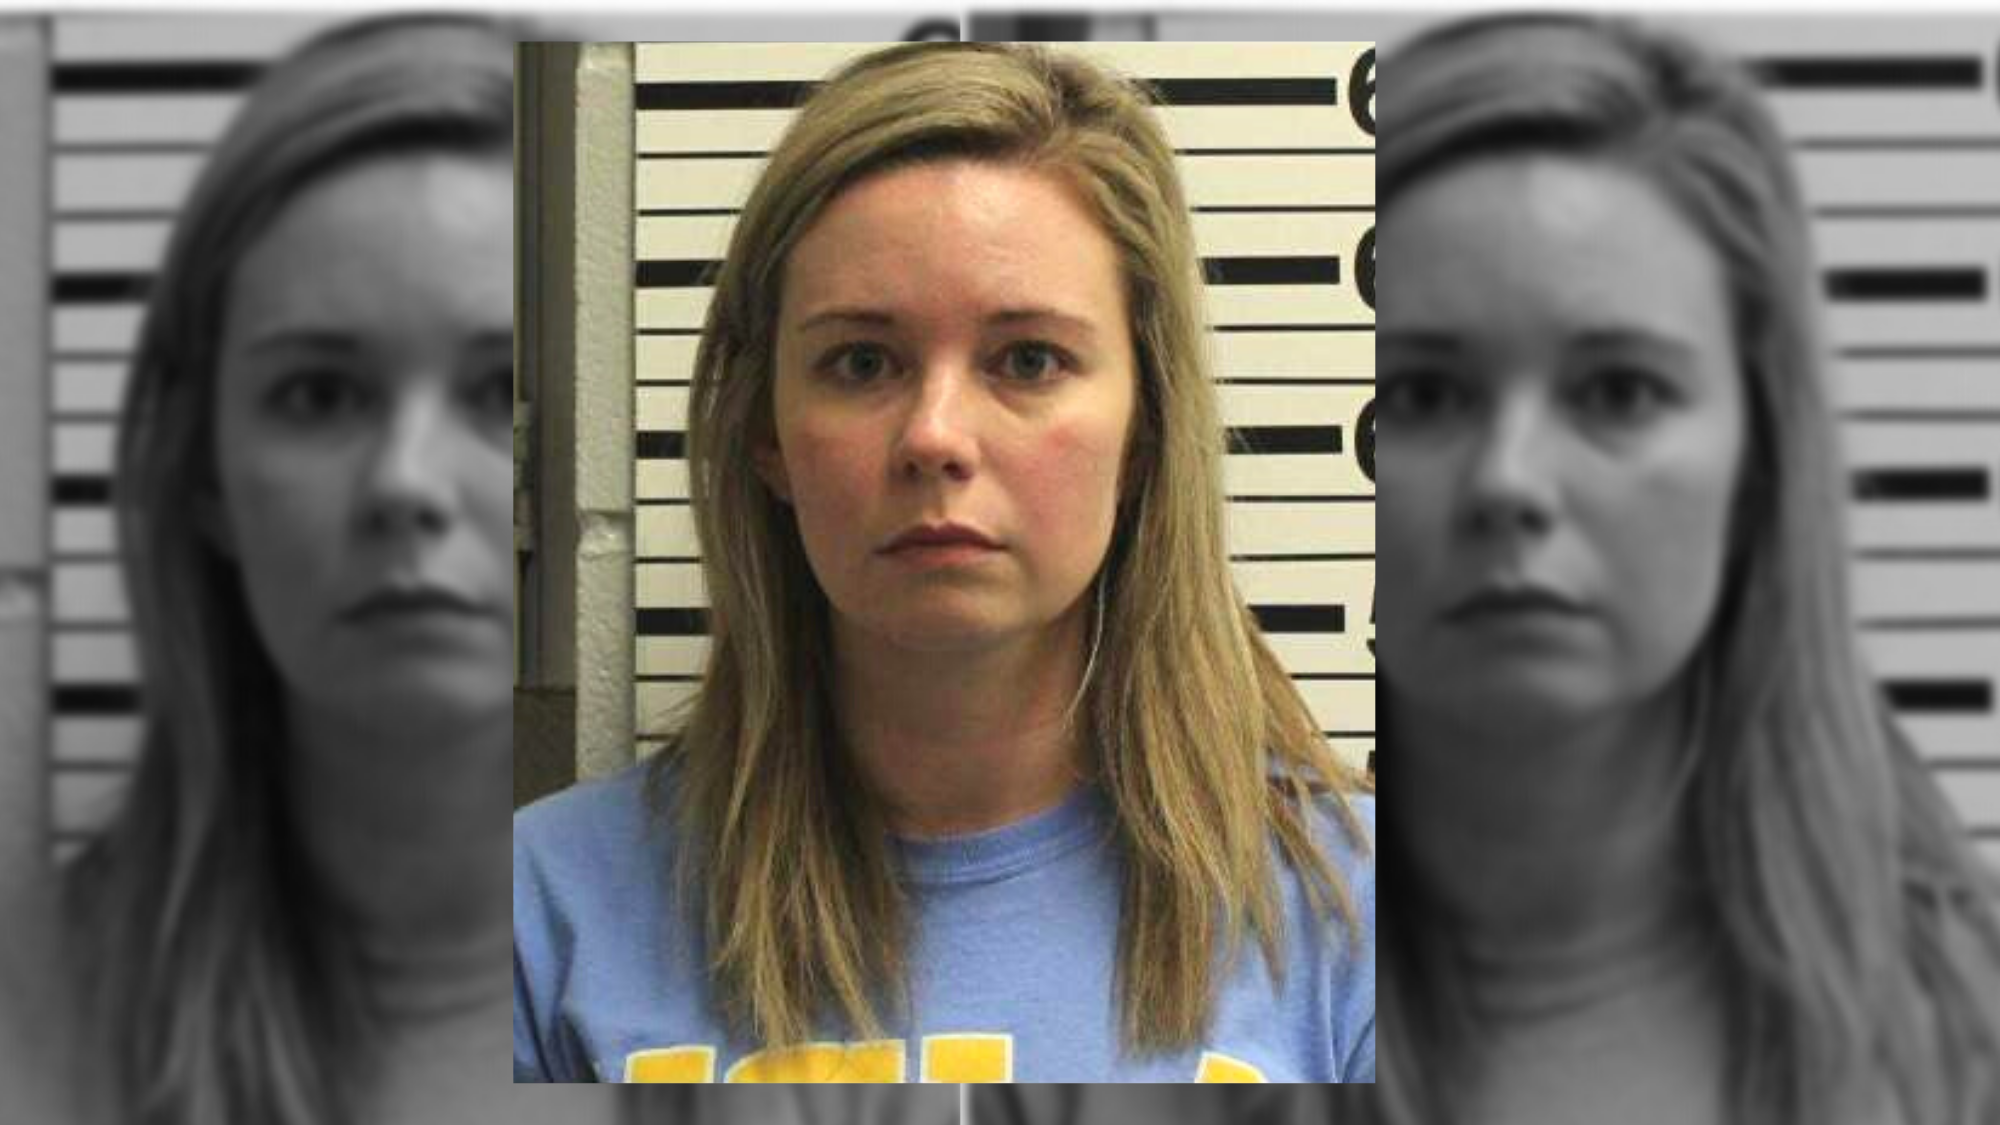 Texas teacher accused of having sexual relationship with 13-year-old student